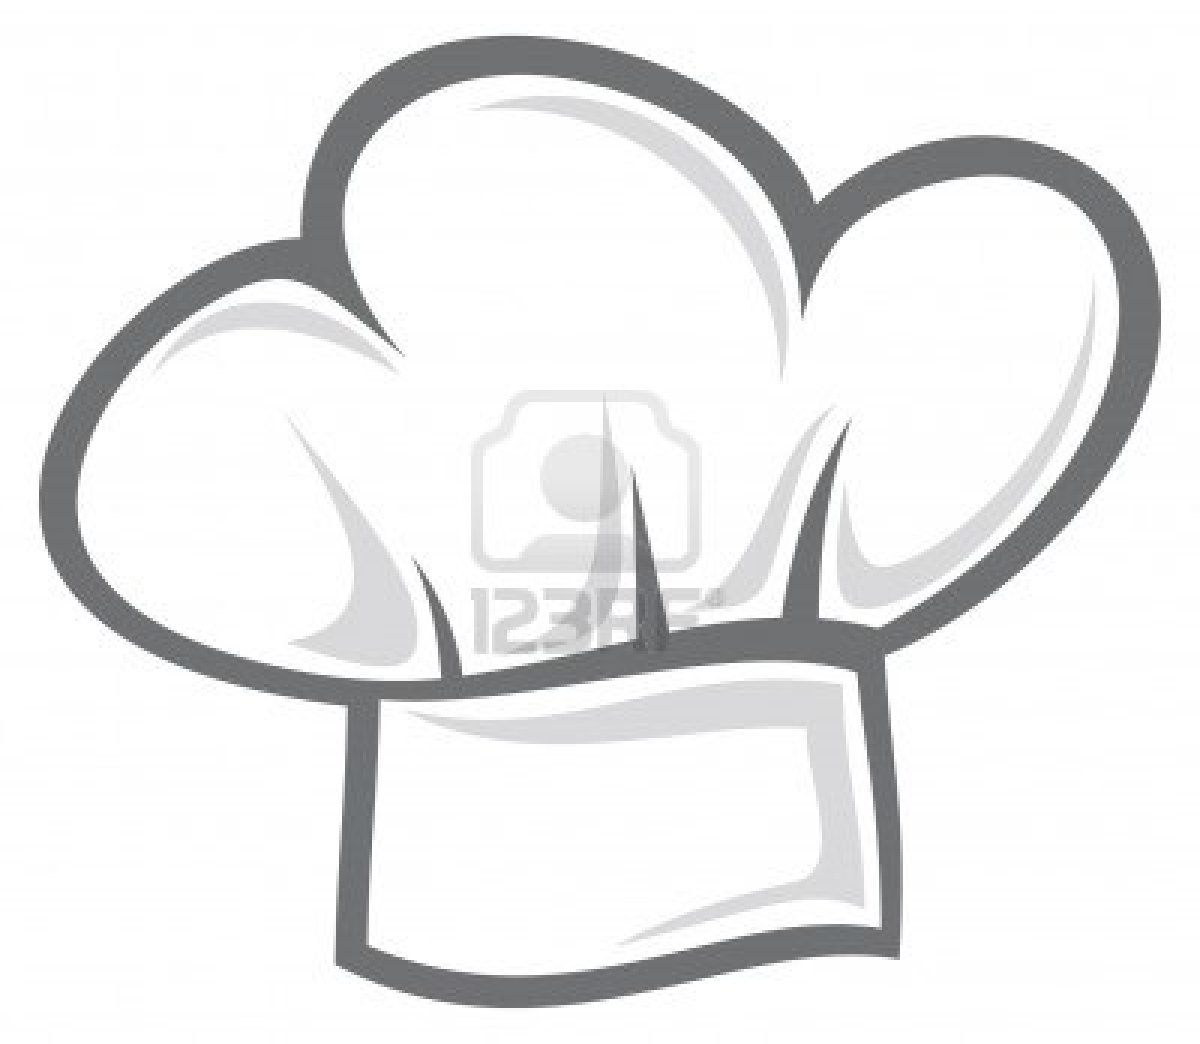 free clipart images chef hat - photo #13